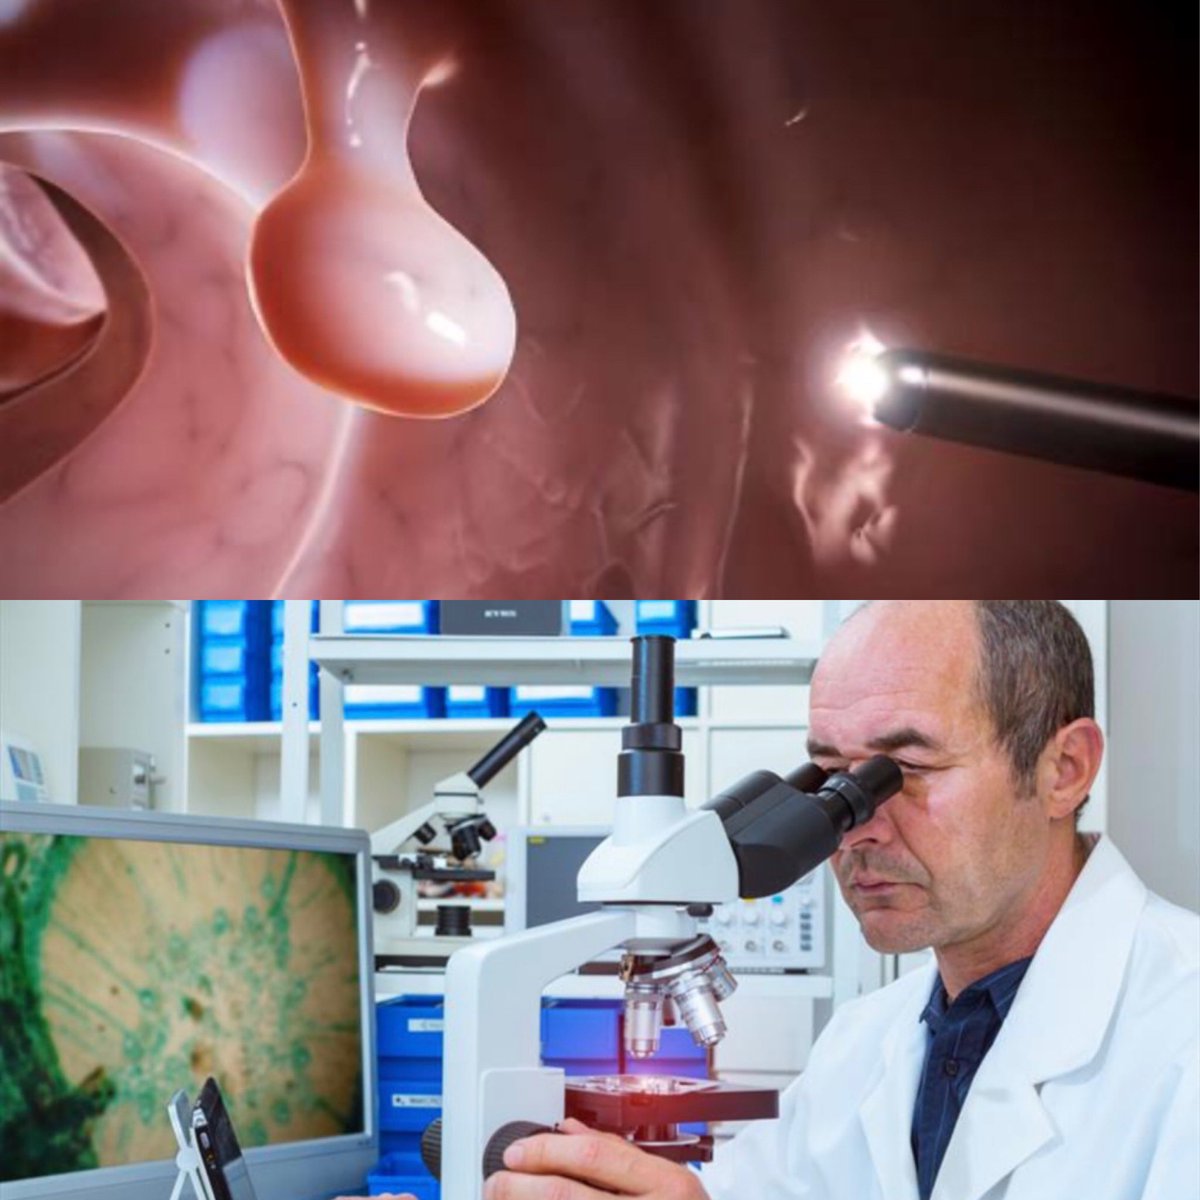 “ with every single colonoscopy, they suck a little piece of normal bowel wall into the scope, snip off the healthy tissue, and send it to the lab. They call it a polyp and bill thousands $$$$ . Since the pathologists get paid just to look at the specimen, they always say the